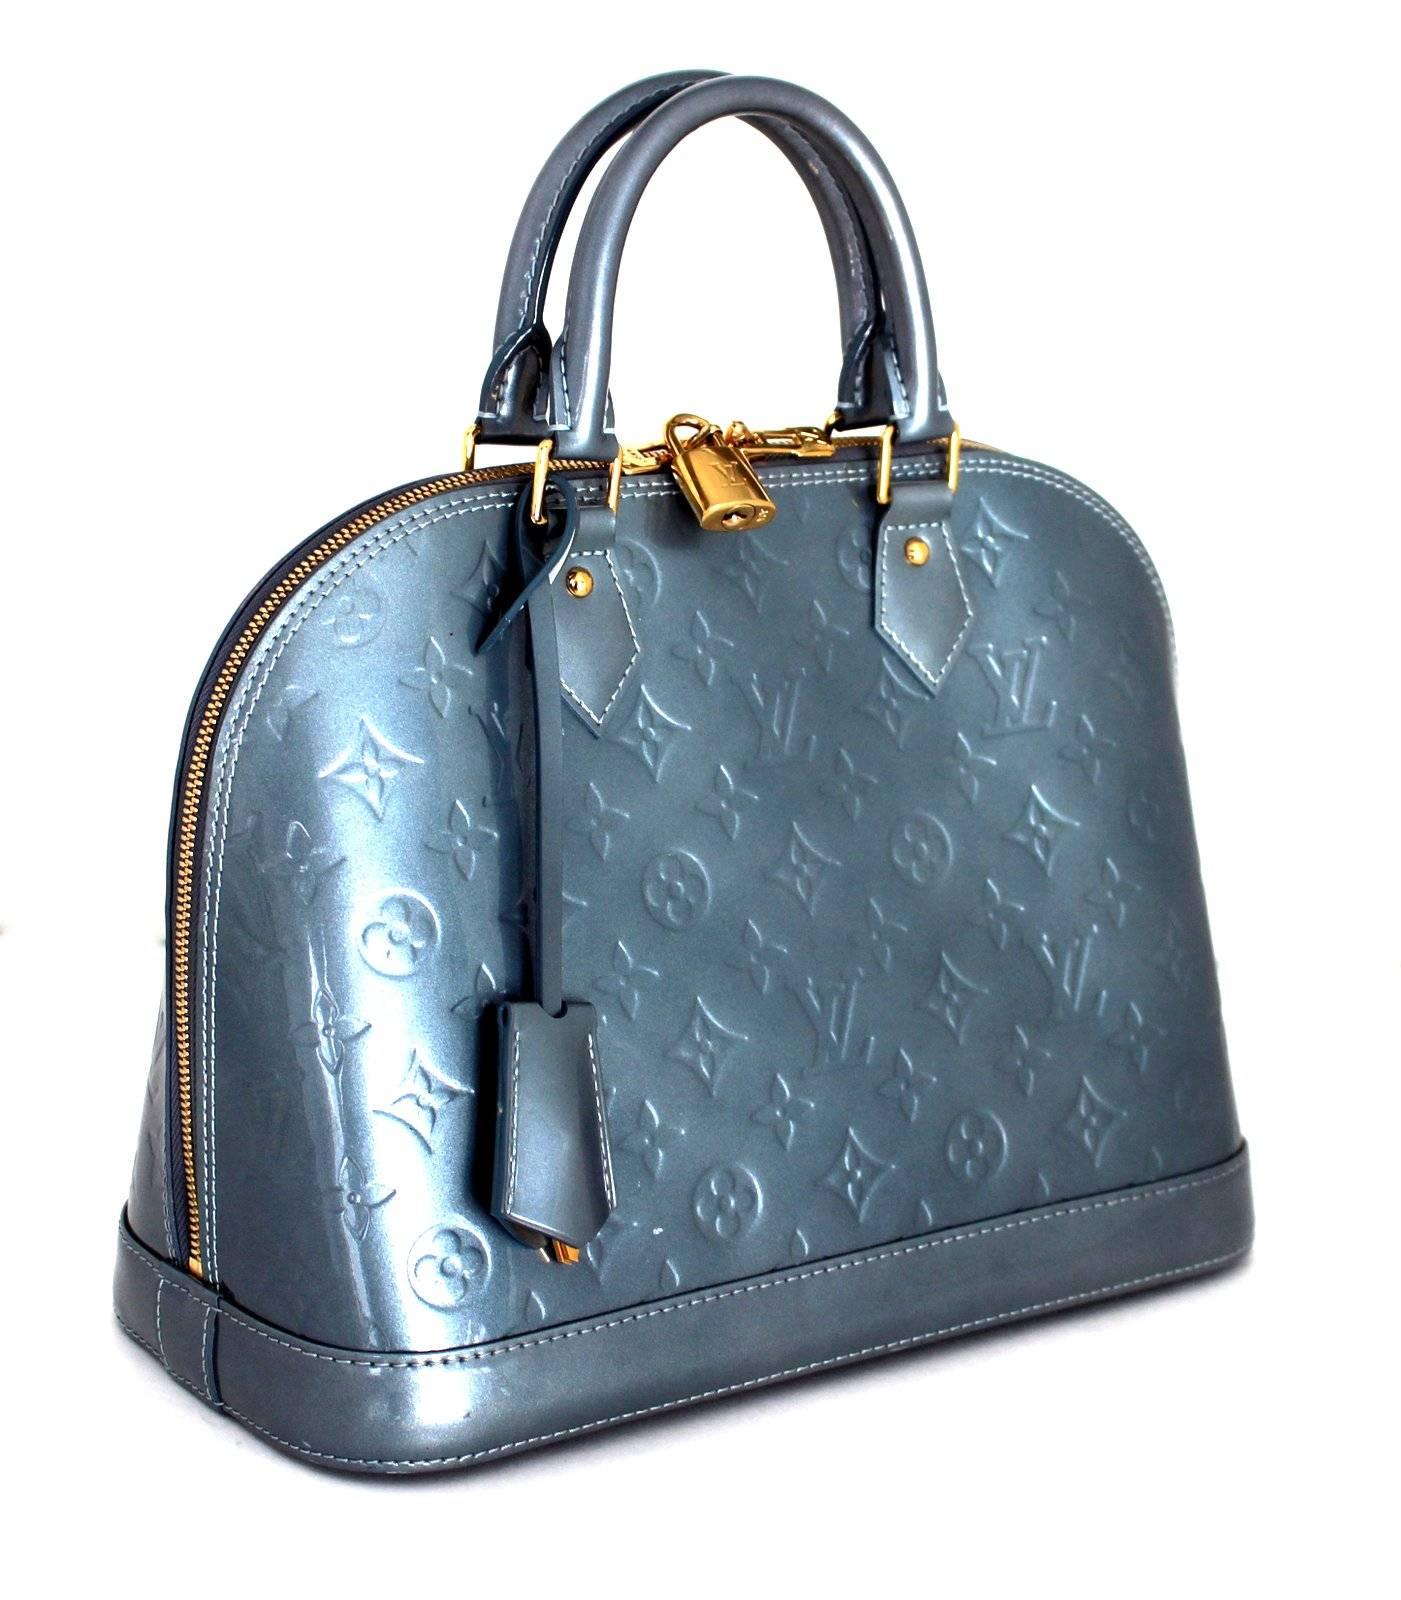 Louis Vuitton GIVRE Vernis Monogram Alma PM - retail $2,350.00.
Mint overall condition; carefully stored, rarely carried.
An icon of the LV collection, the Alma is a currently available style and considered a true classic.  
Silver blue grey